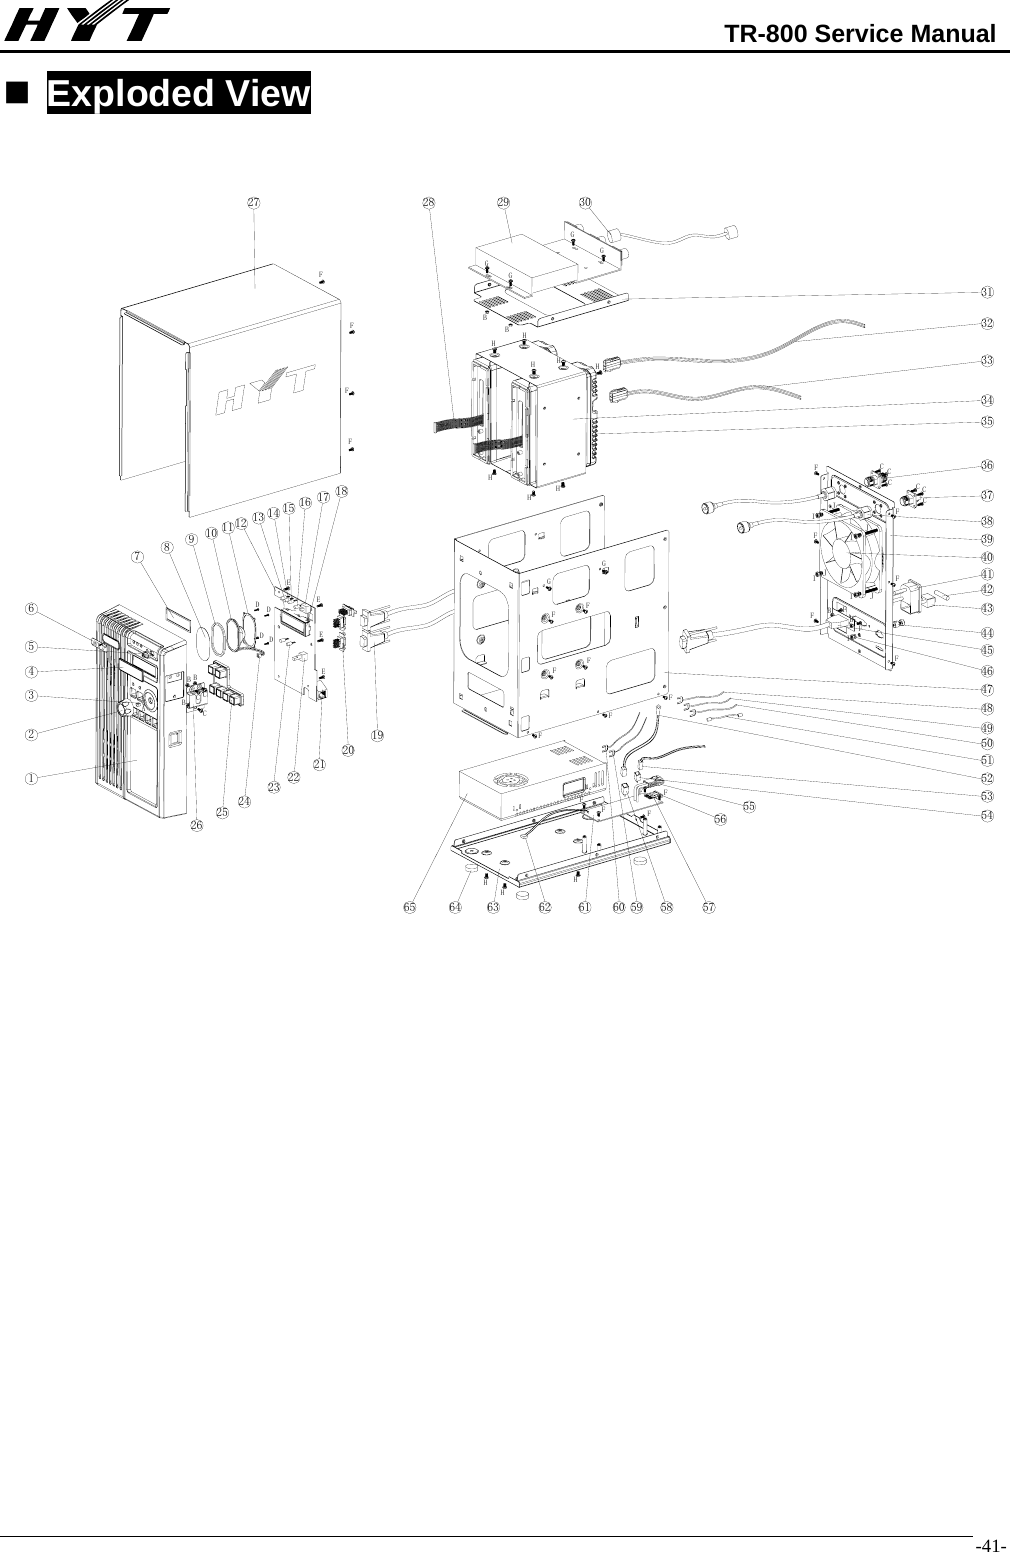                                                            TR-800 Service Manual  -41- Exploded View                                   ABBBCCCDDDDEEEEFFFFFFFFFFFFFFFFFFFFFFFFGGGGGGBBBBHHHHHHHHHHHIIIIIJJJJCCCCCC12345678910 11 12 13 14 15 16 17 181921222324252627 28 29 30313233343536373839404142434445464748495053545556575960616263646551525820